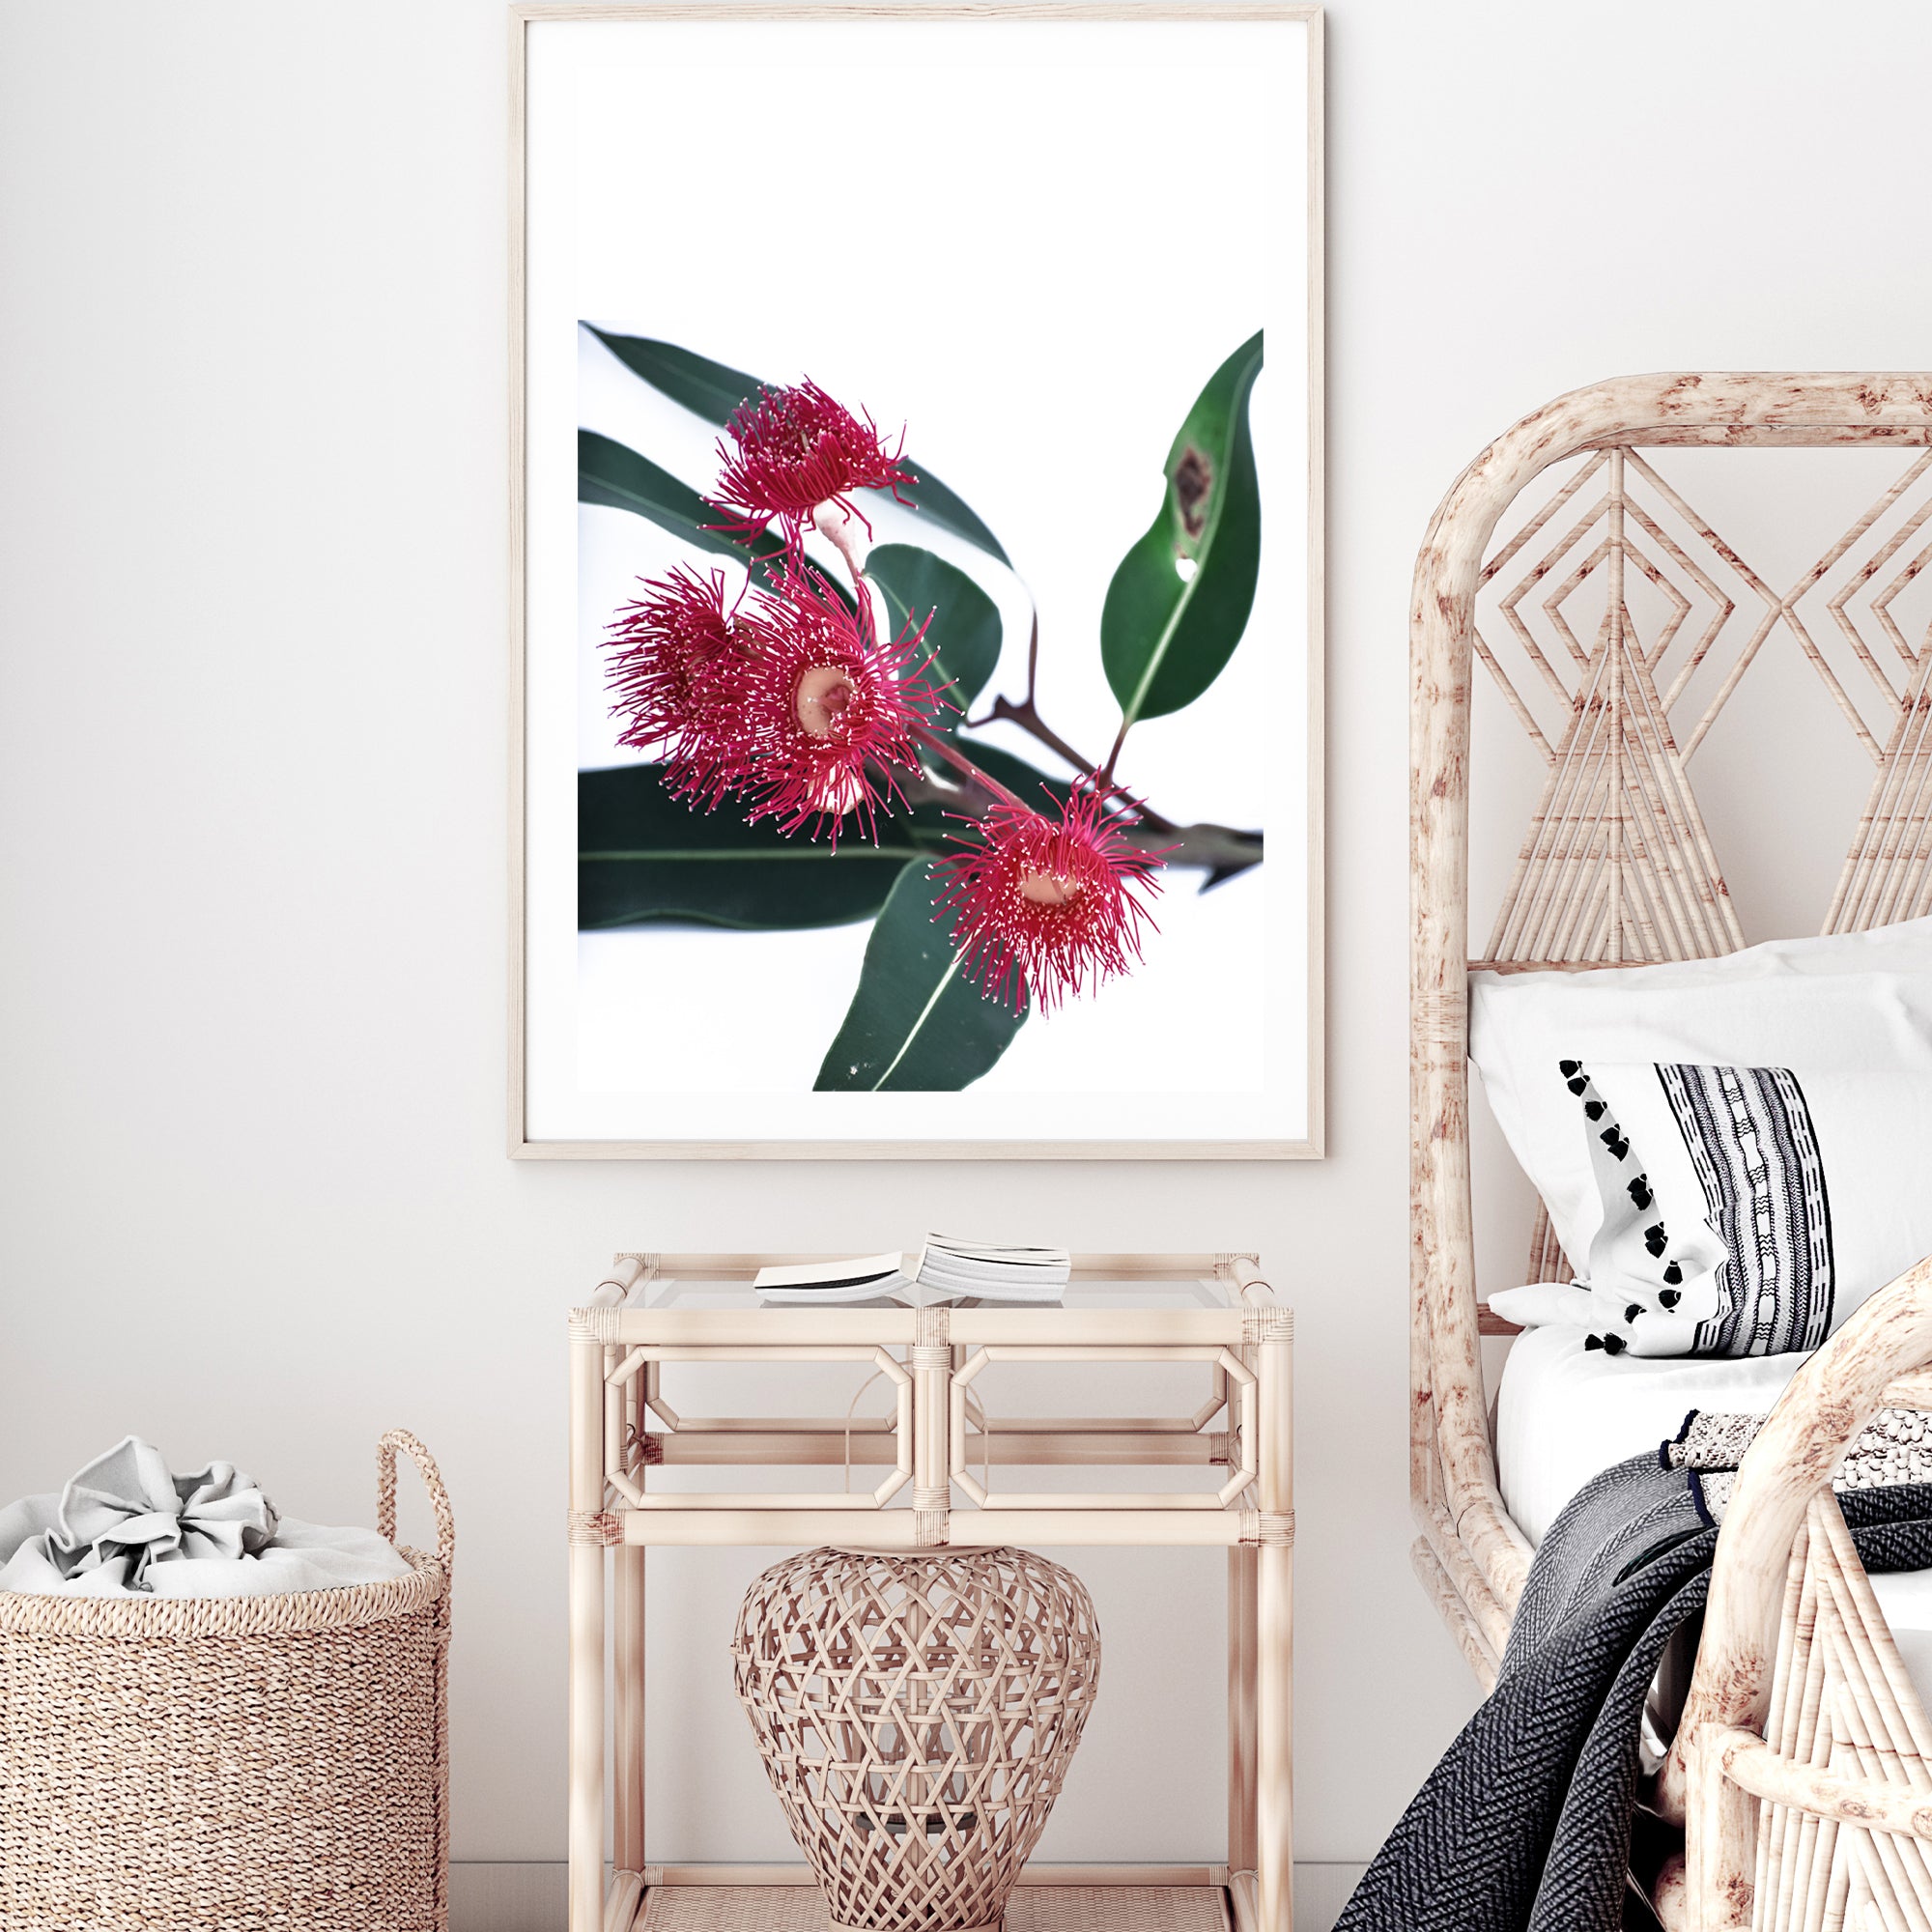 A beautiful floral wall art featuring red wild flowers A and green eucalyptus leaves, available in canvas and art prints.